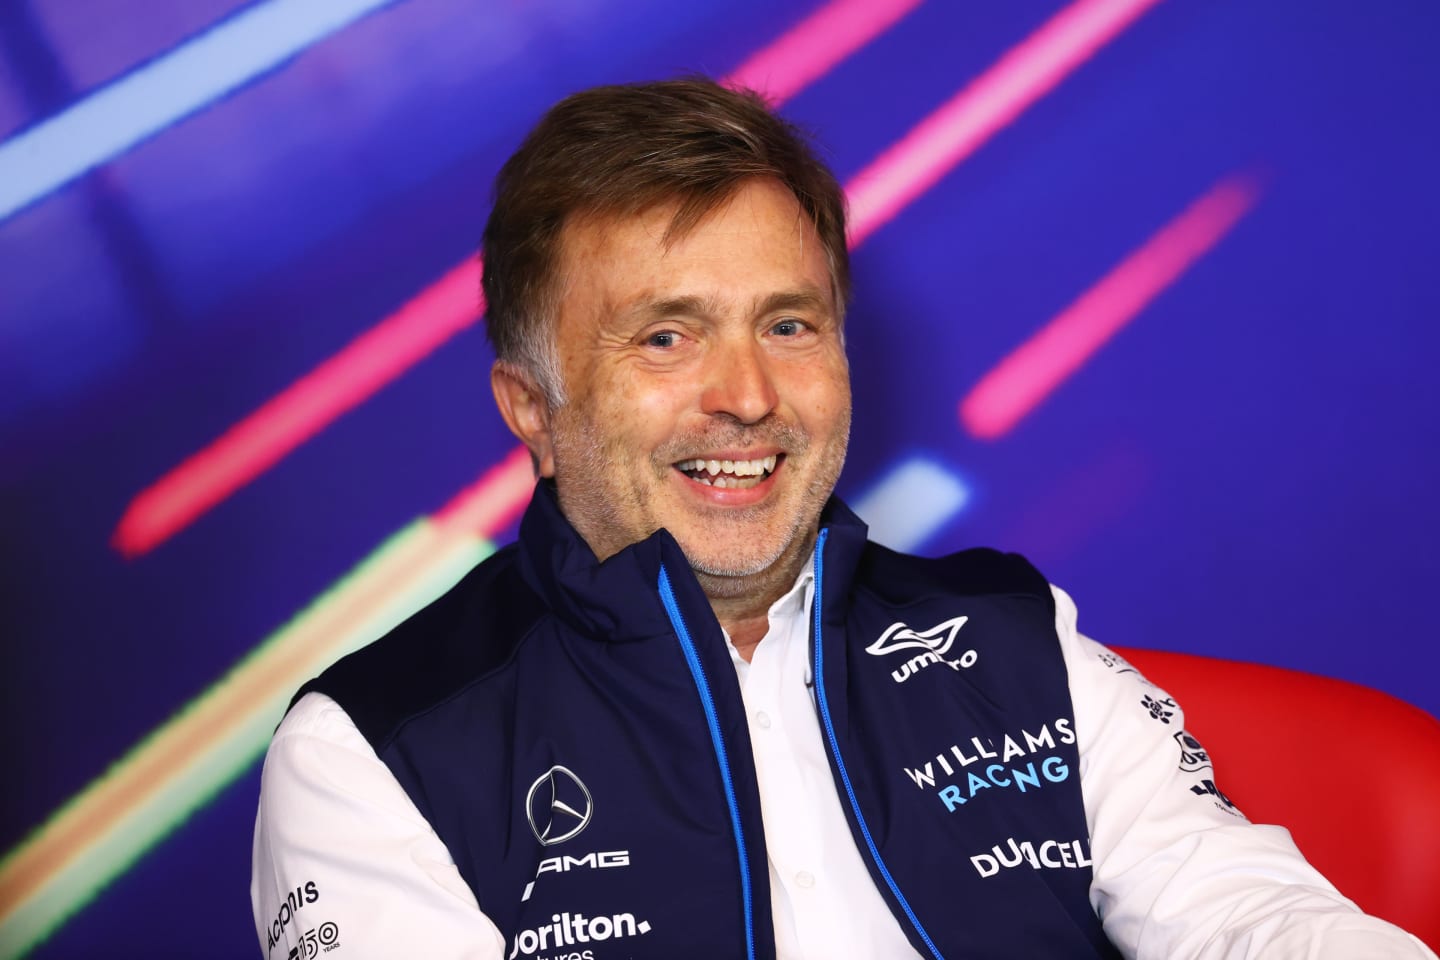 MONTREAL, QUEBEC - JUNE 18: Jost Capito, CEO of Williams F1 looks on in the Team Principals Press Conference prior to final practice ahead of the F1 Grand Prix of Canada at Circuit Gilles Villeneuve on June 18, 2022 in Montreal, Quebec. (Photo by Dan Istitene/Getty Images)